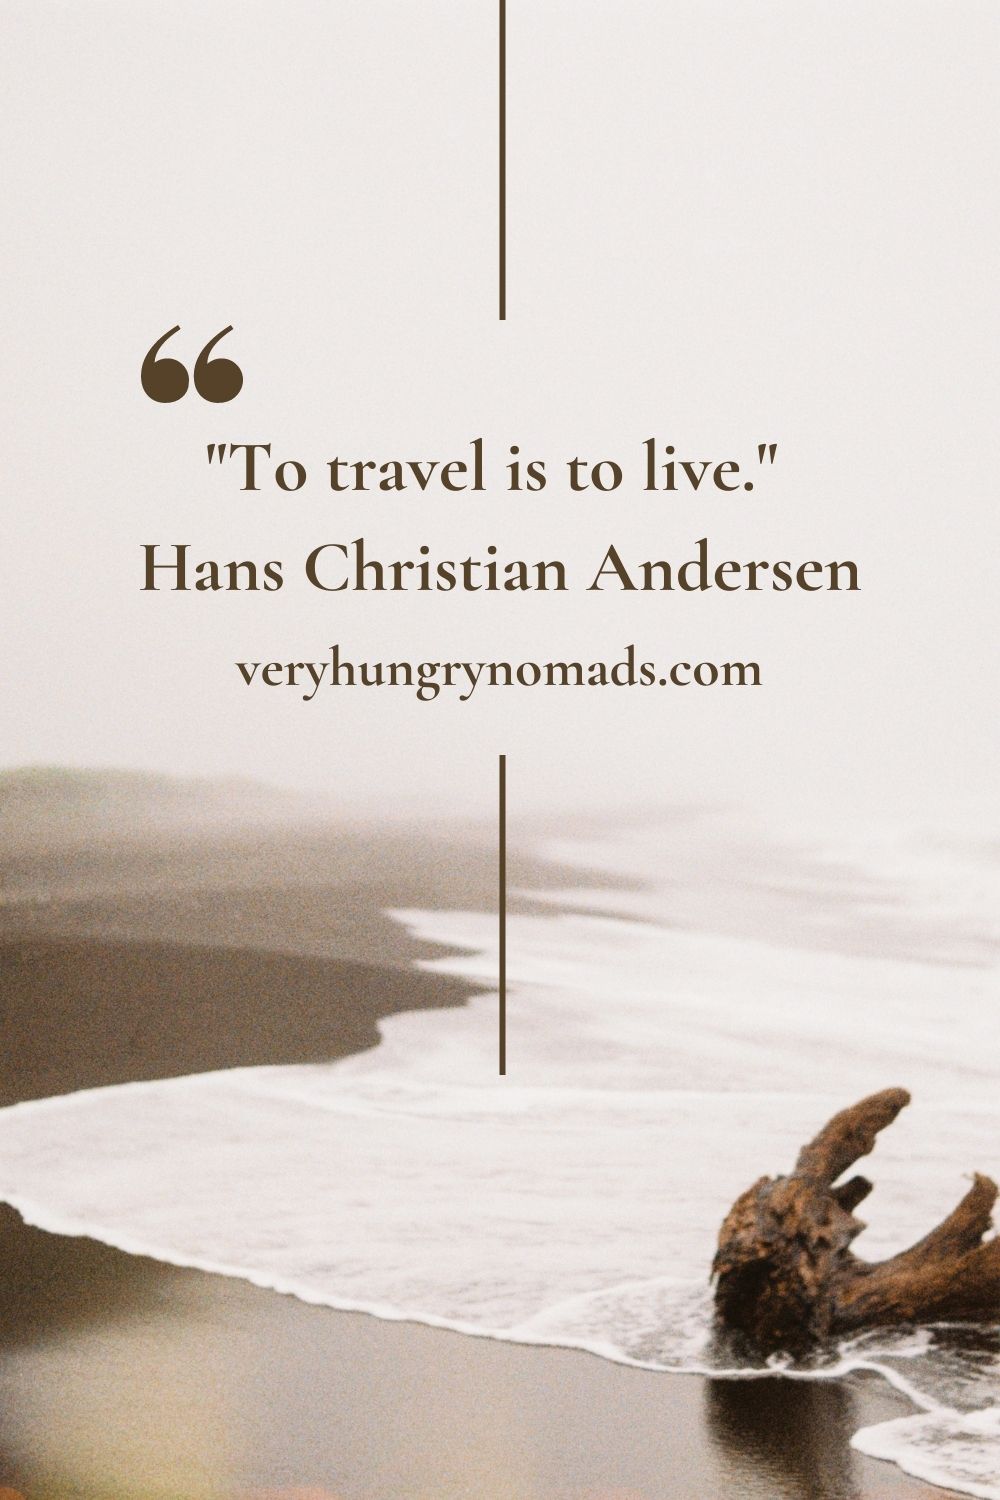 Quotes about adventures - to travel is to live